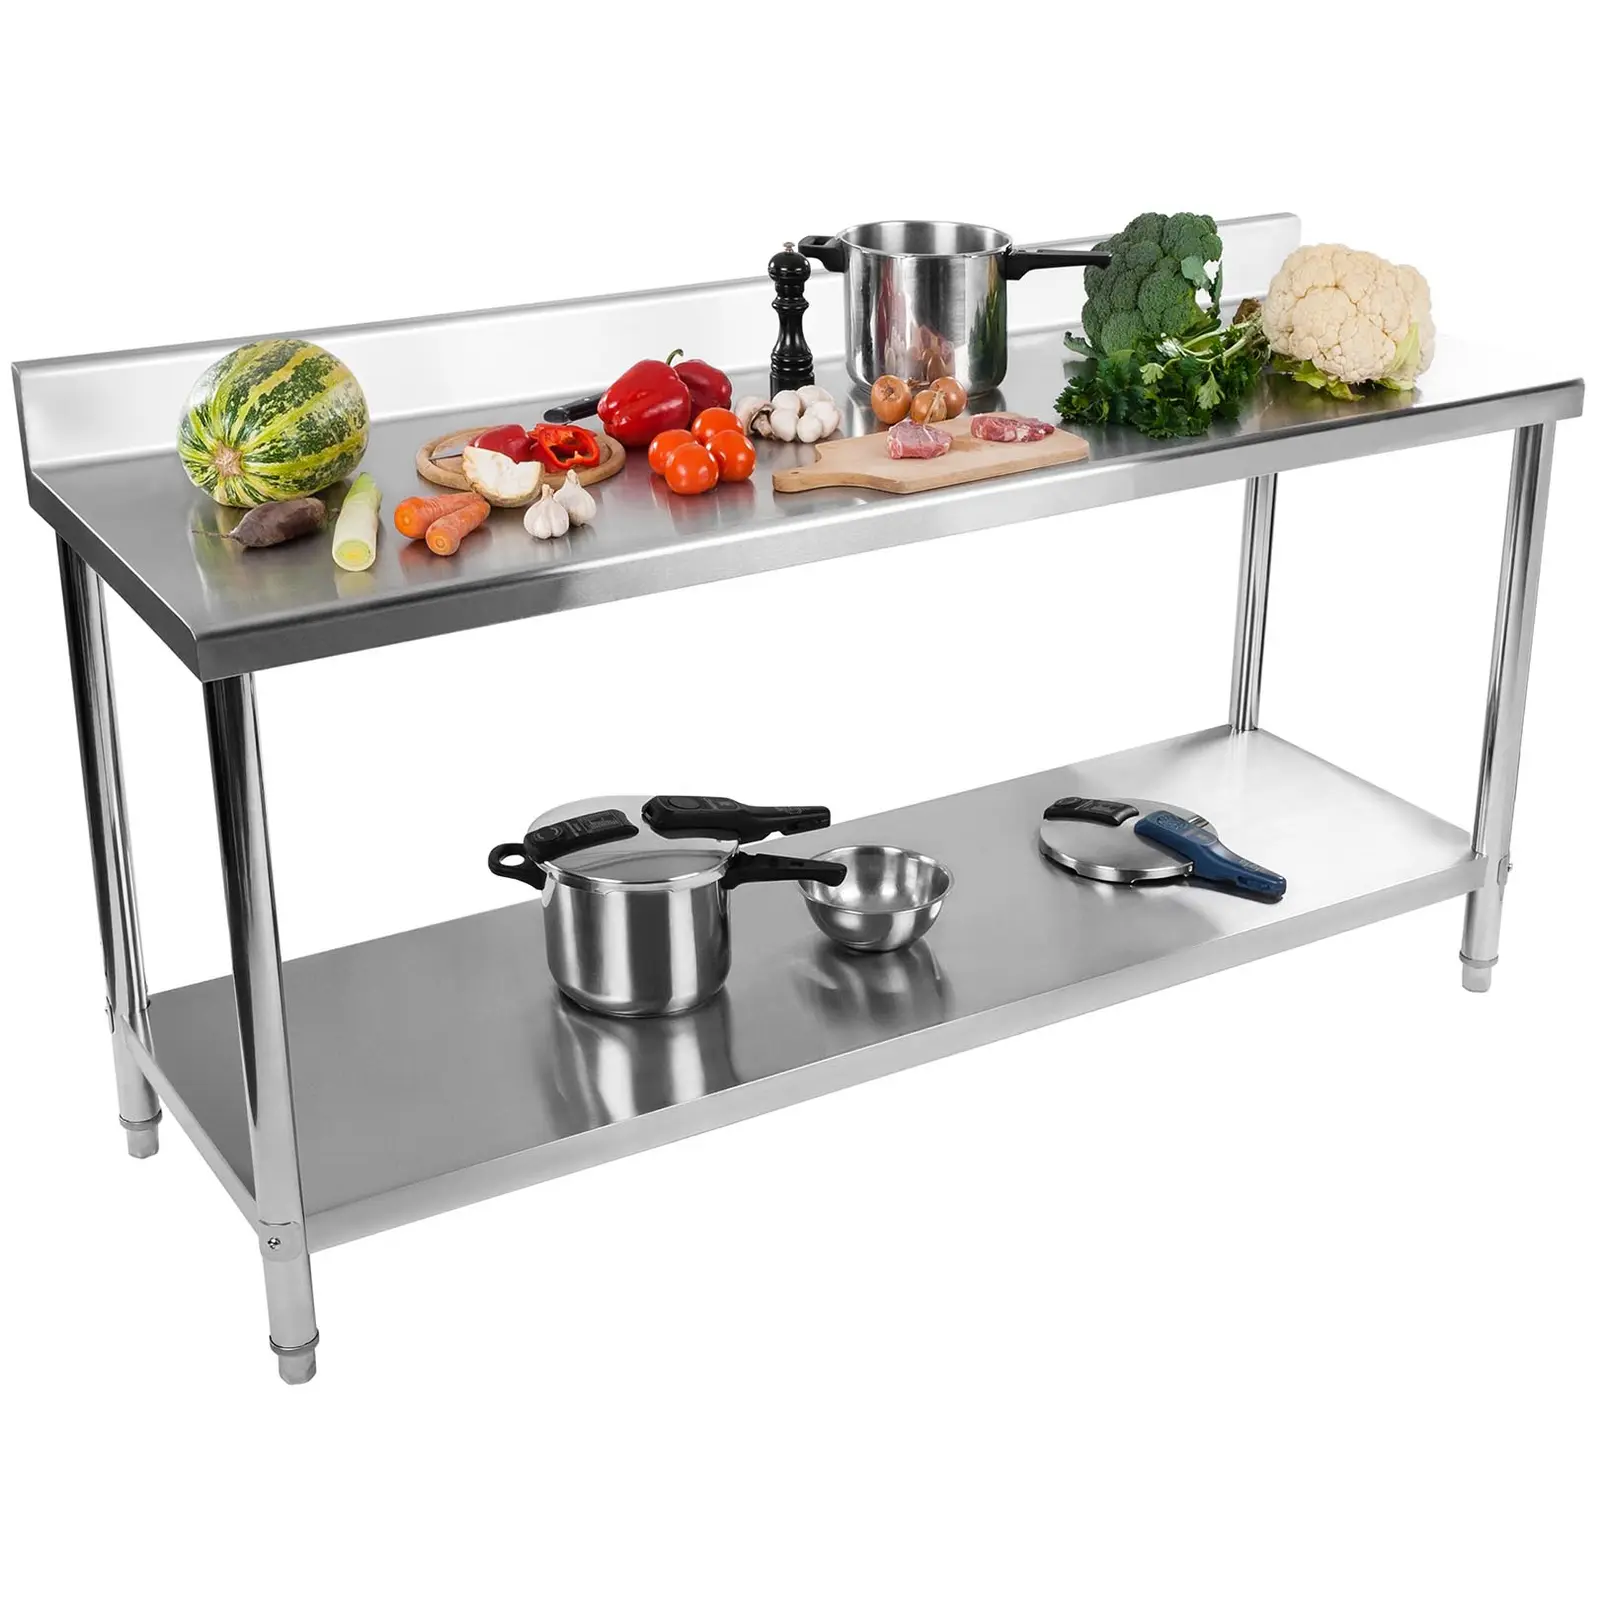 Stainless Steel Table - 180 x 60 cm - Upstand - 182 kg carrying capacity